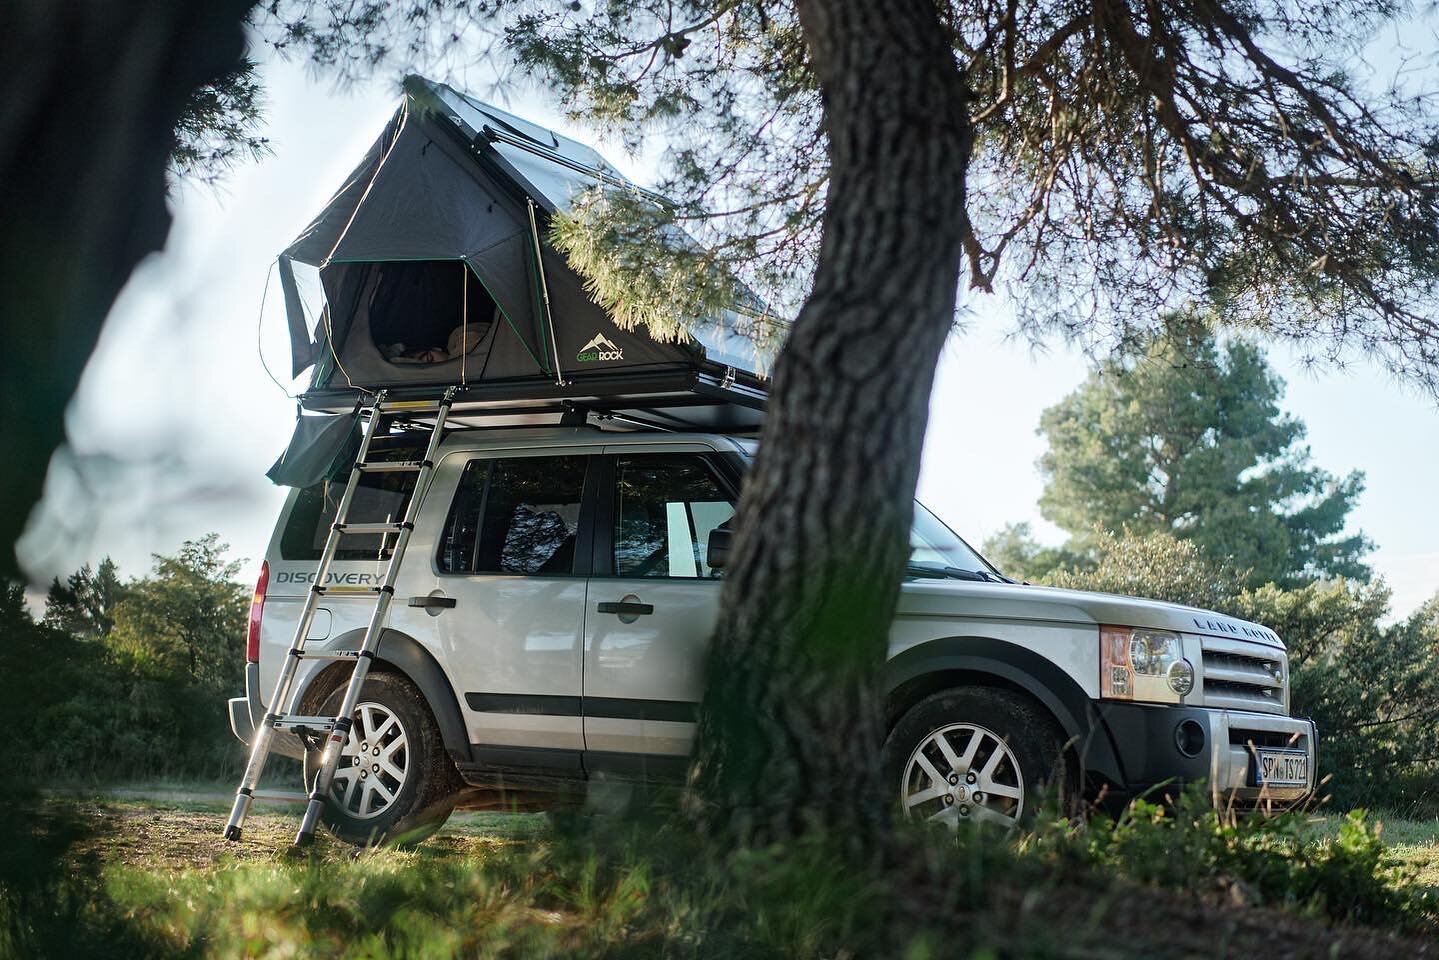 Explore the wilderness with the new 2022 GEAR ROCK Revelstoke👊🏻 Features like individual configuration of side openings brings you big advantages for all type of weather🏔🌦

#expedition #adventure #explorer #camping #outdoors #overlanding #roadtri